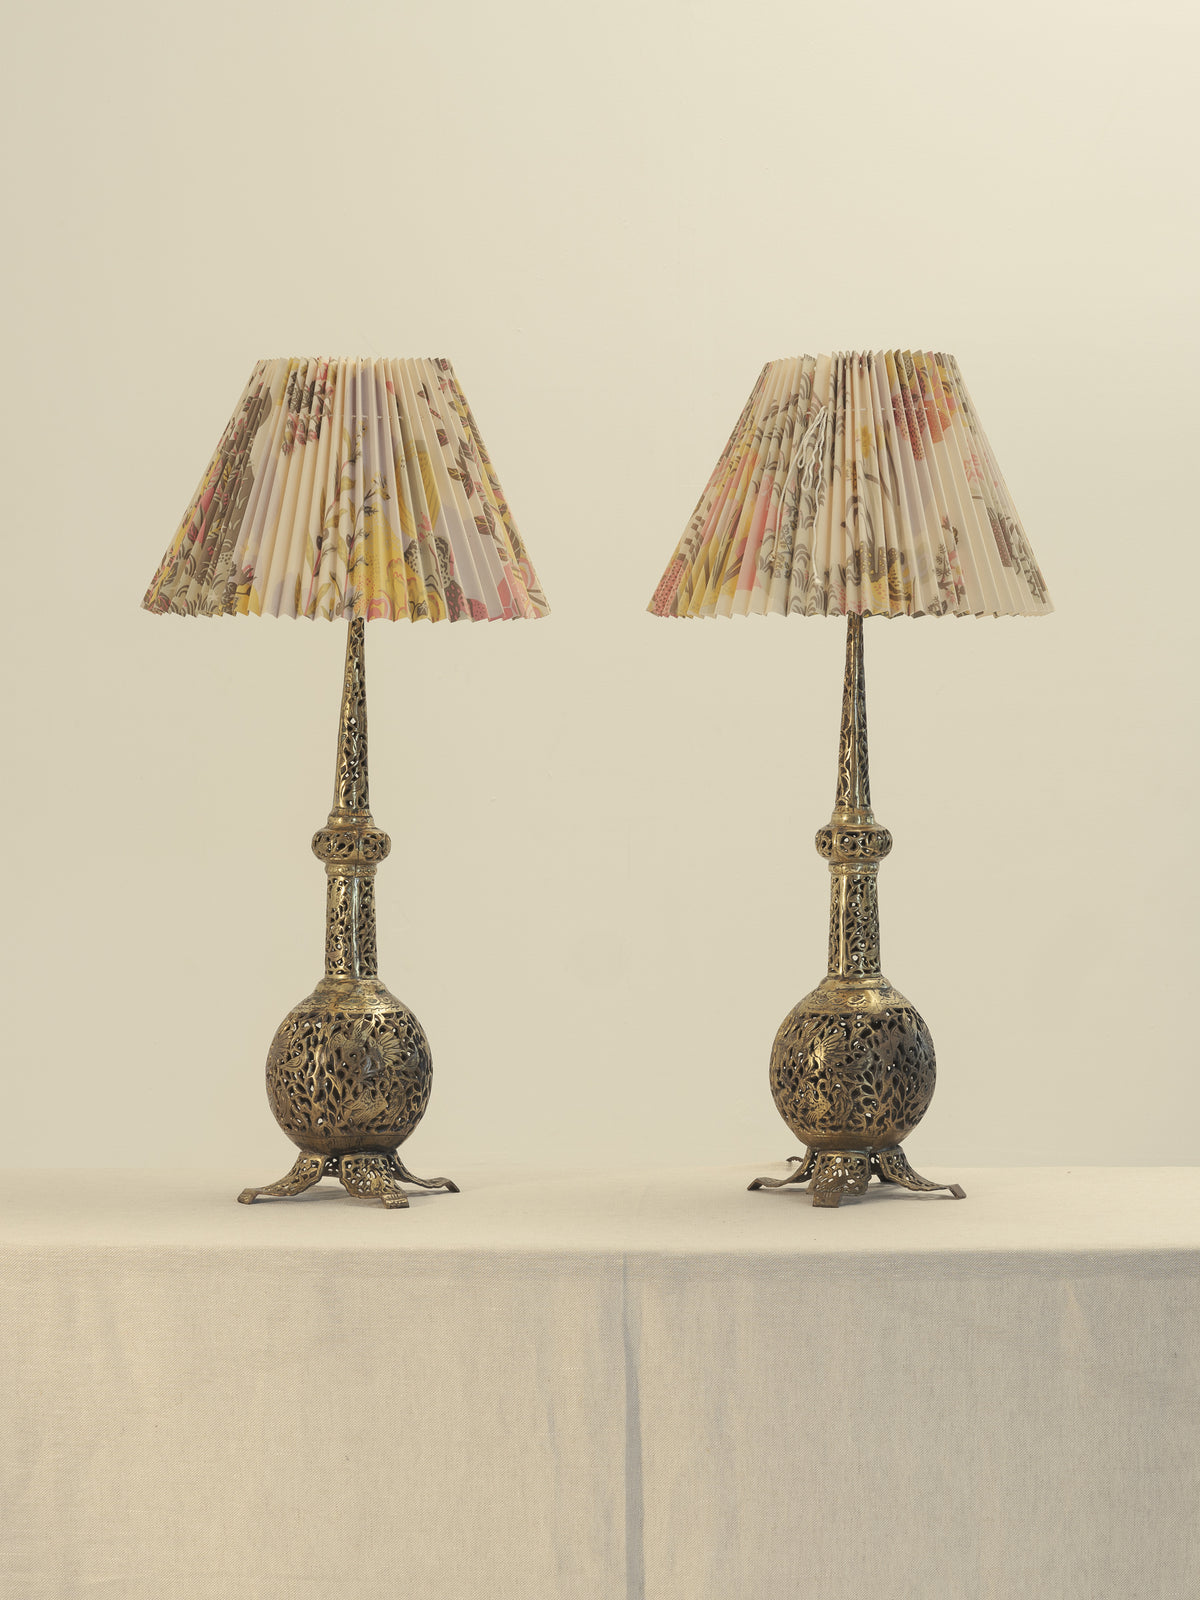 A Pair of Ornate Brass Gourd Lamp Bases